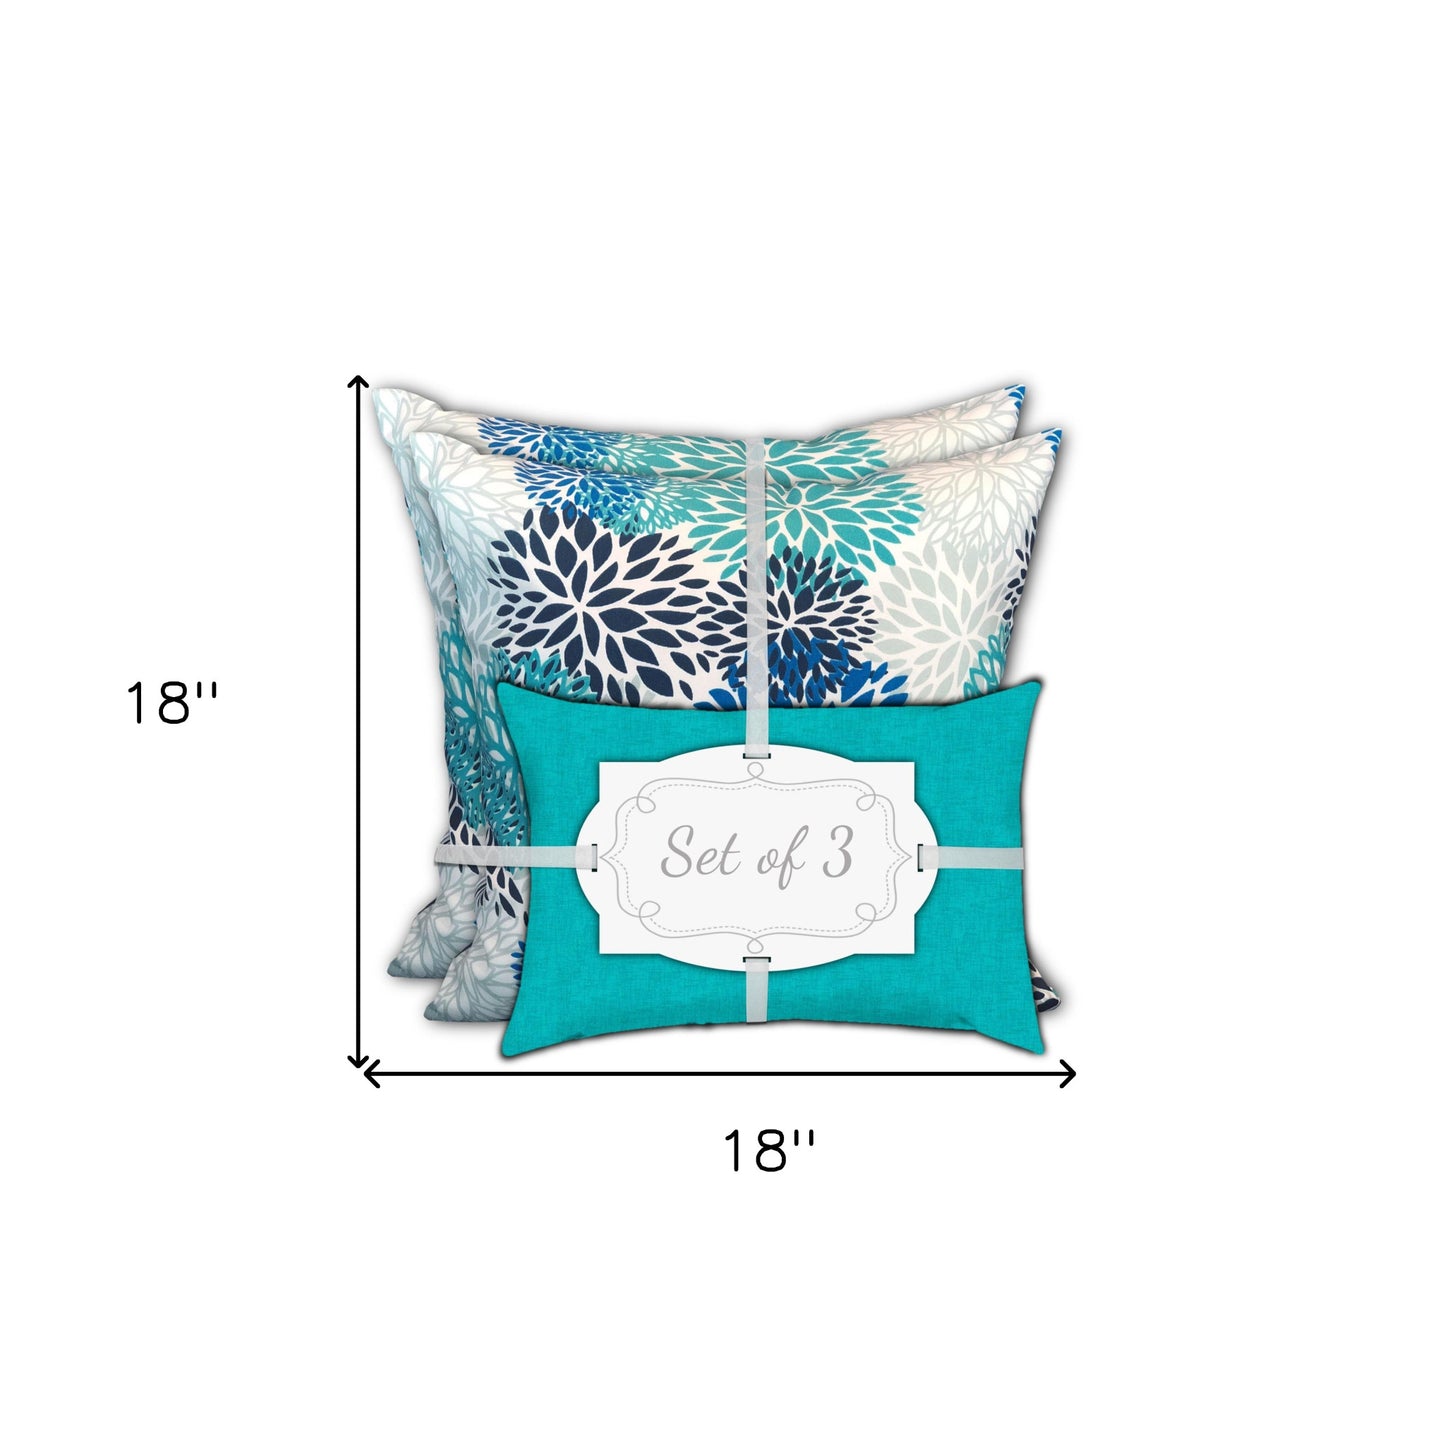 18" X 18" Blue And White Blown Seam Floral Throw Indoor Outdoor Pillow